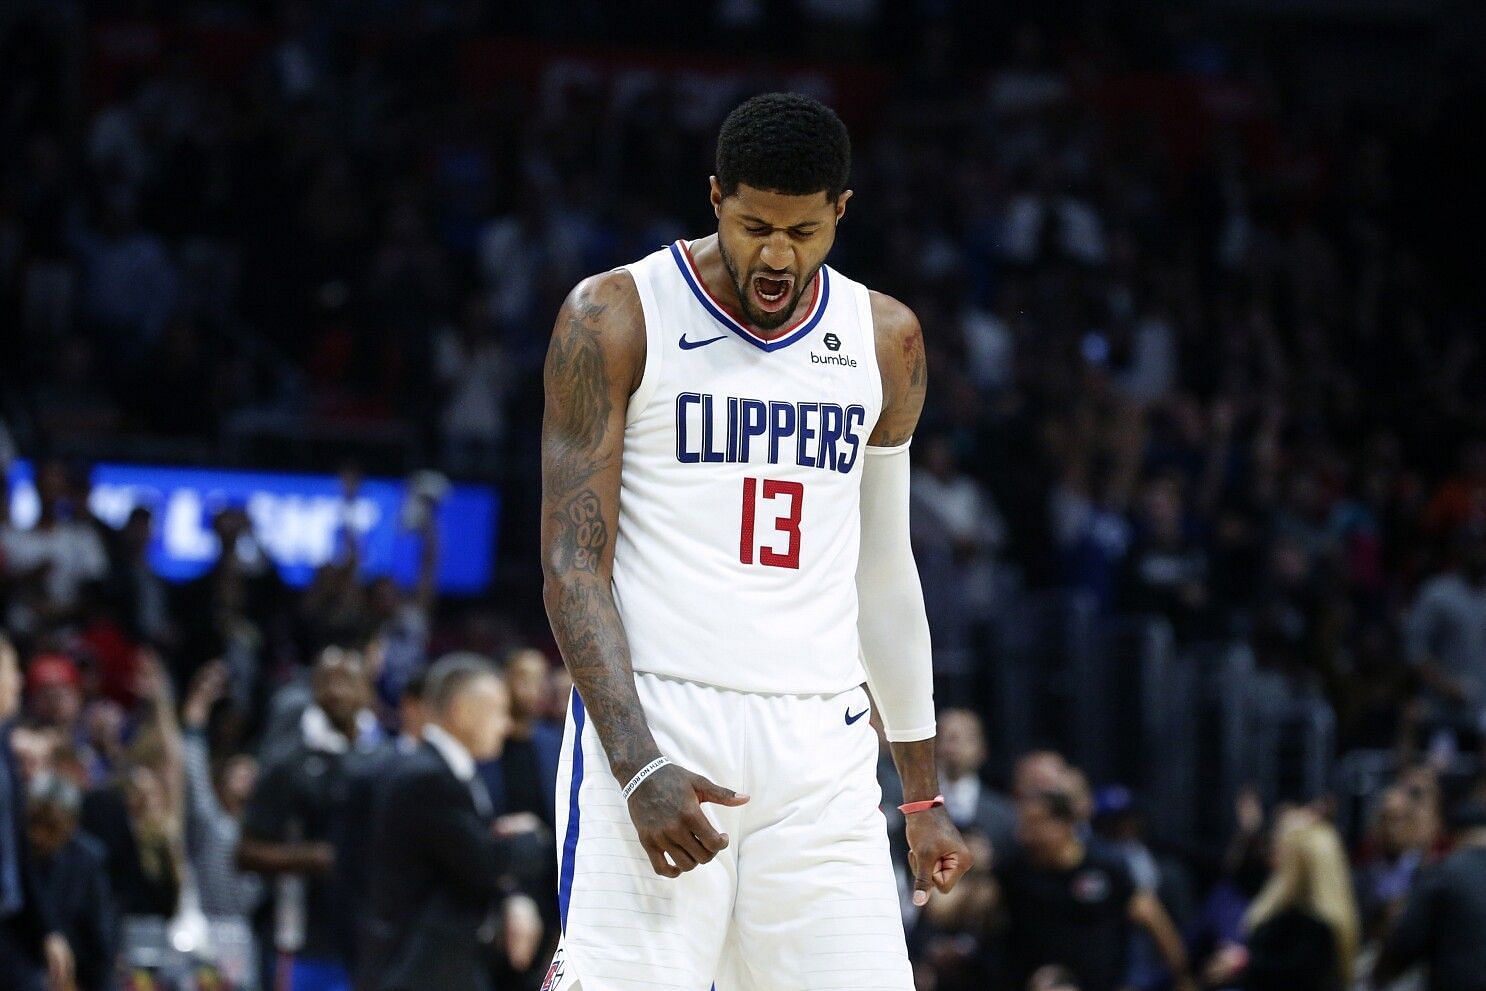 Paul George could be poised for a career year with the Los Angeles Clippers